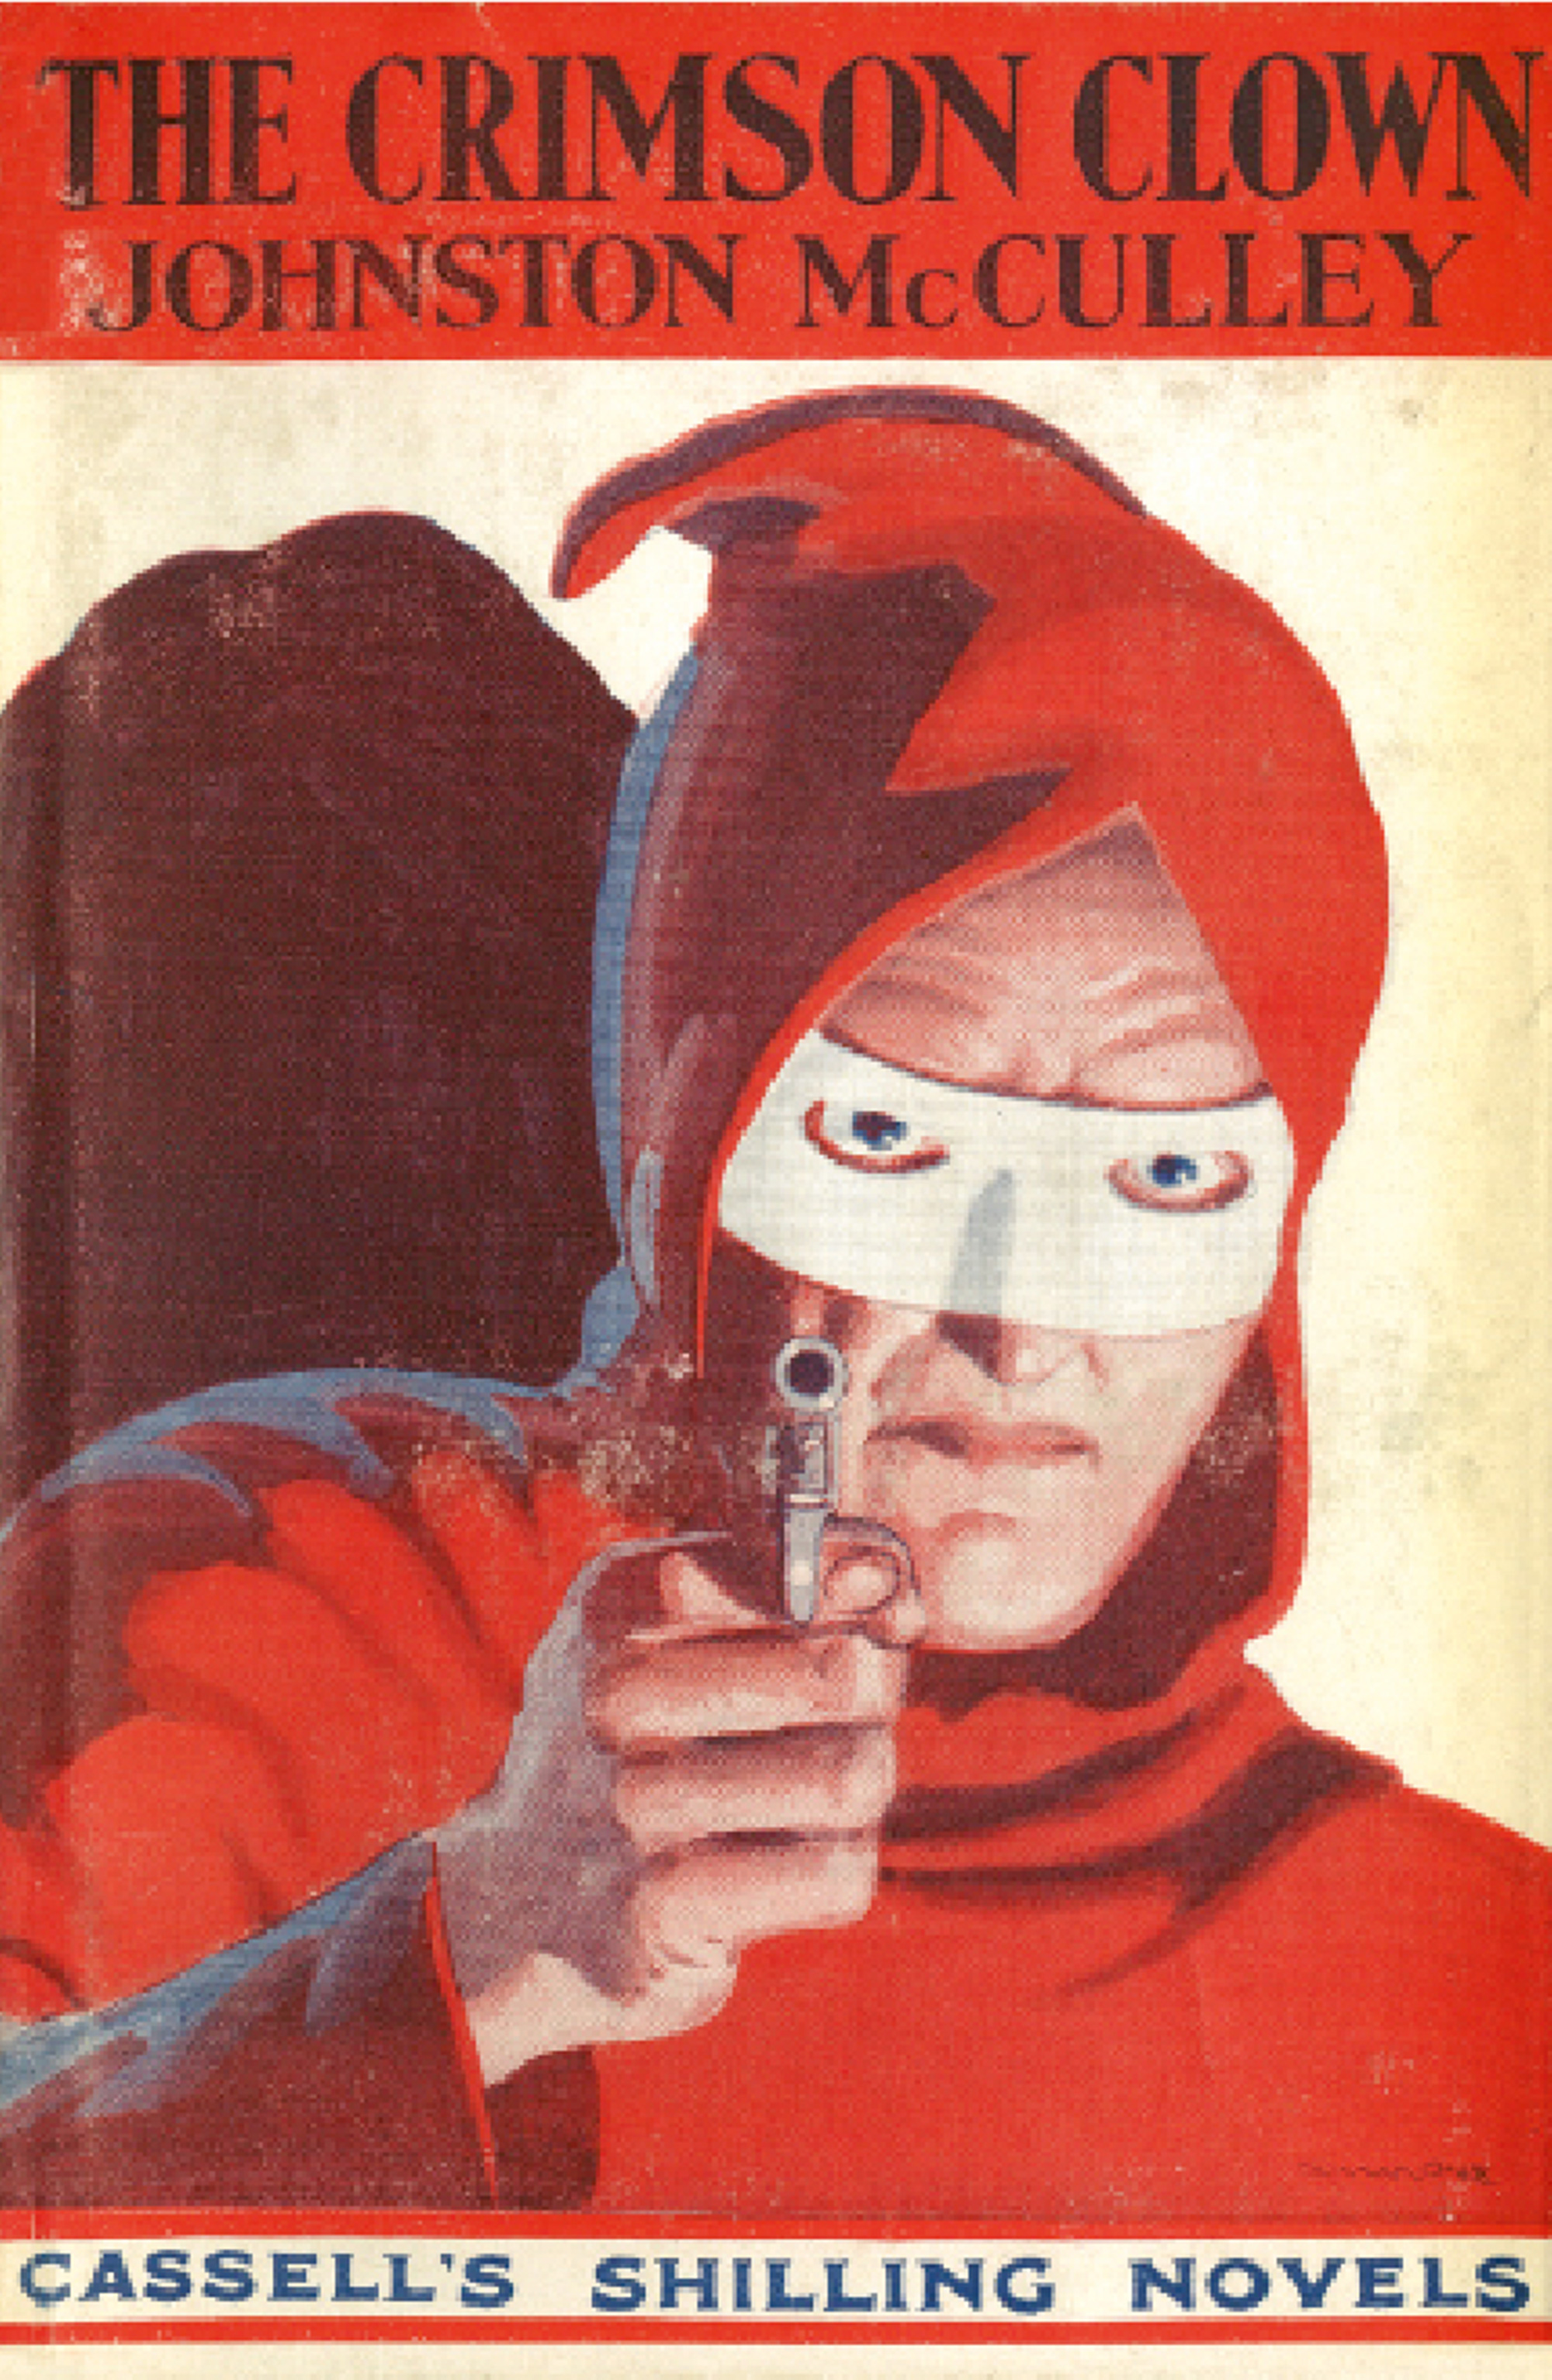 Cover of the first “shilling” edition of Johnston McCulley’s The Crimson Clown, 1931.